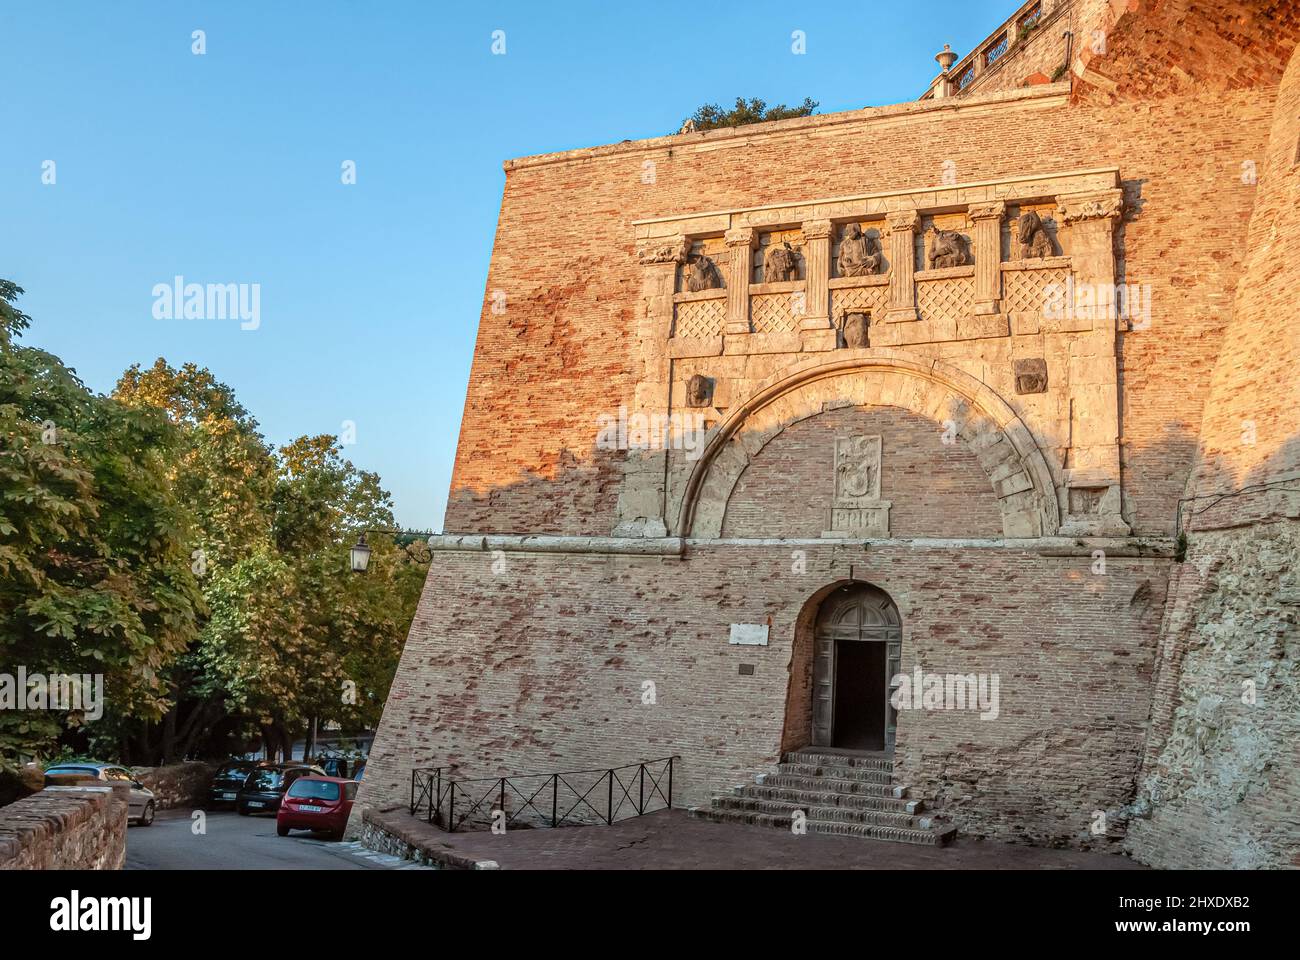 Rocca Paolina and Porta Marzia at the old town of Perugia, Umbria, Italy  Stock Photo - Alamy